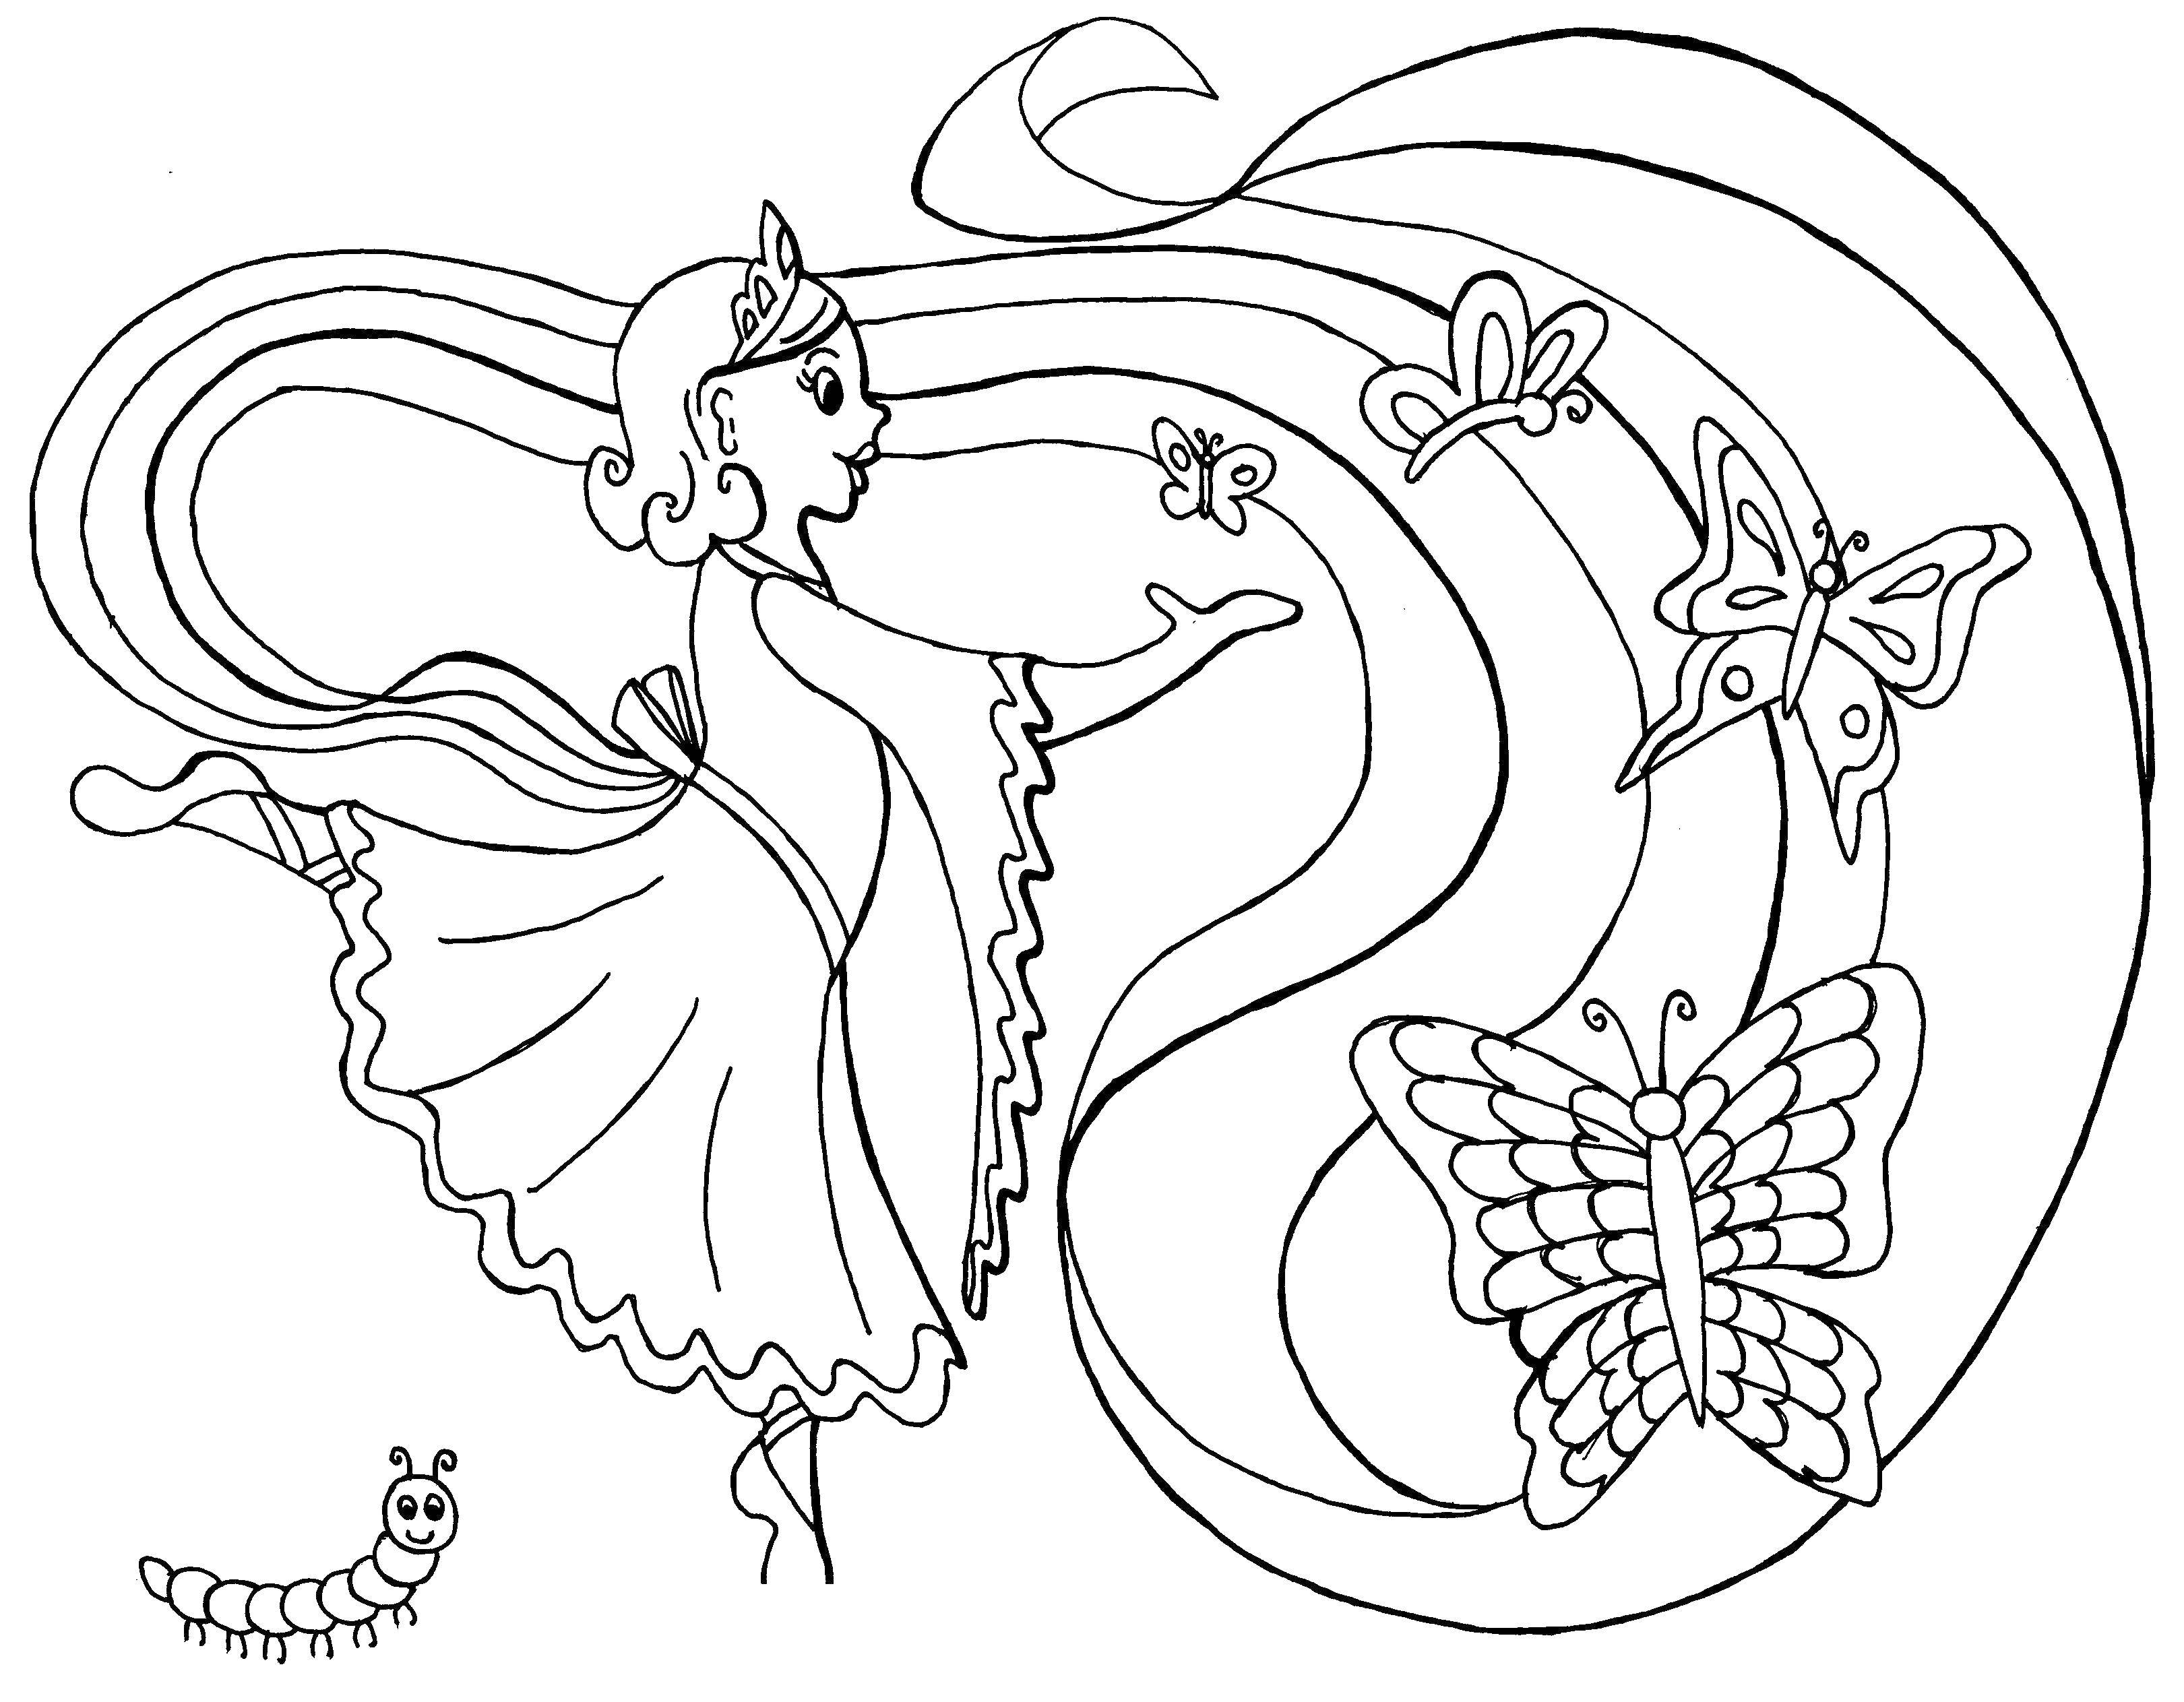 Coloring Princess with butterflies. Category Princess. Tags:  princesses, butterflies.